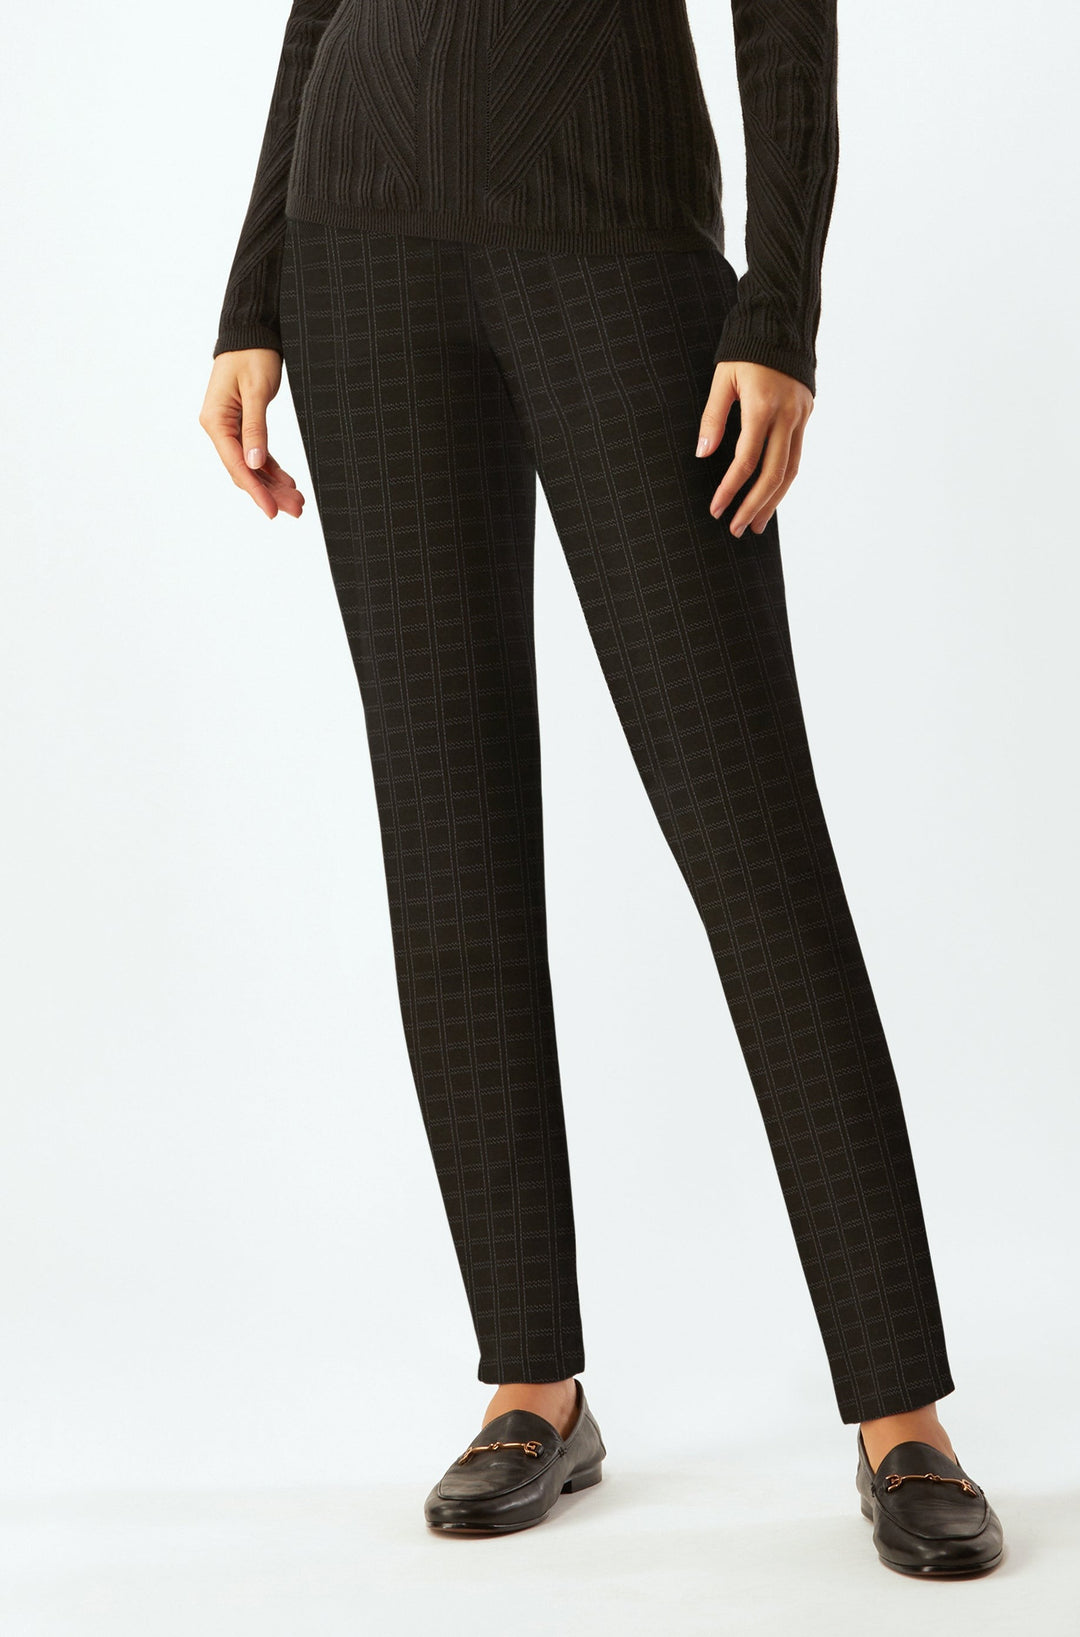 Springfield Classic Pull-On In Park Avenue Stretch- Black/Grey Plaid